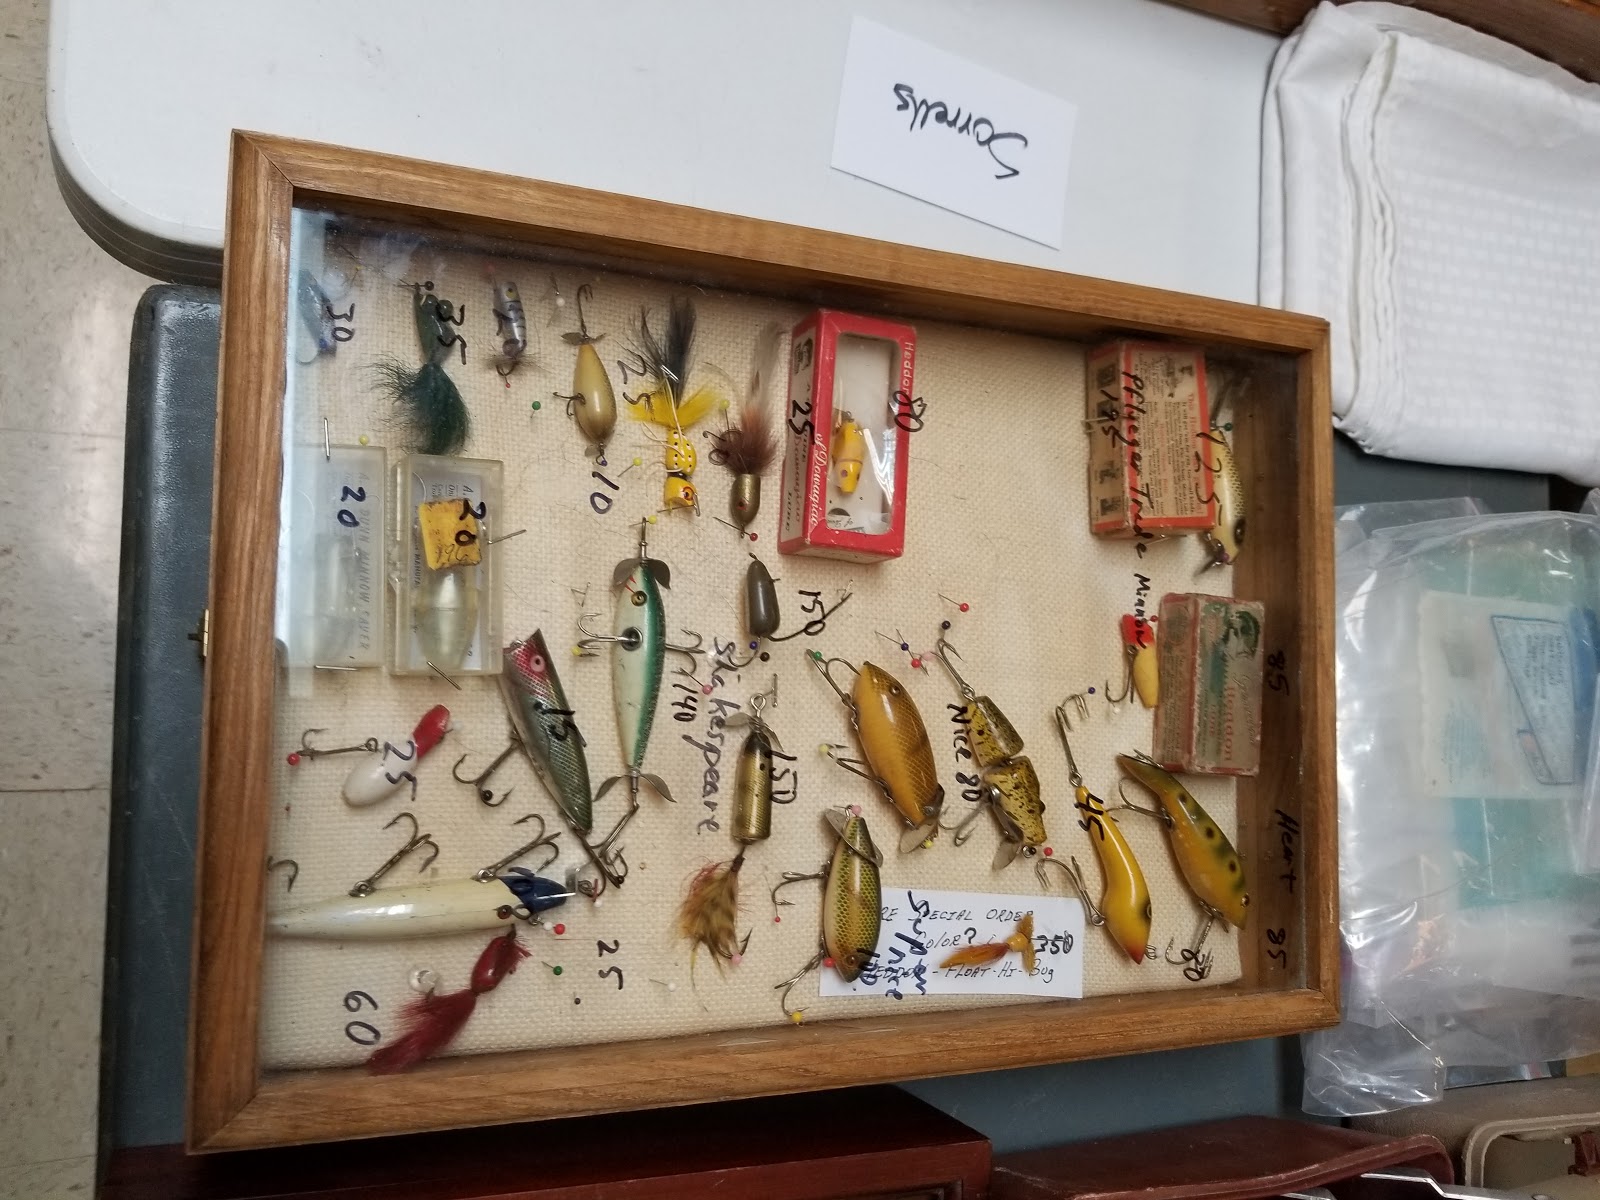 Chance's Folk Art Fishing Lure Research Blog: Temple TX NFLCC Show